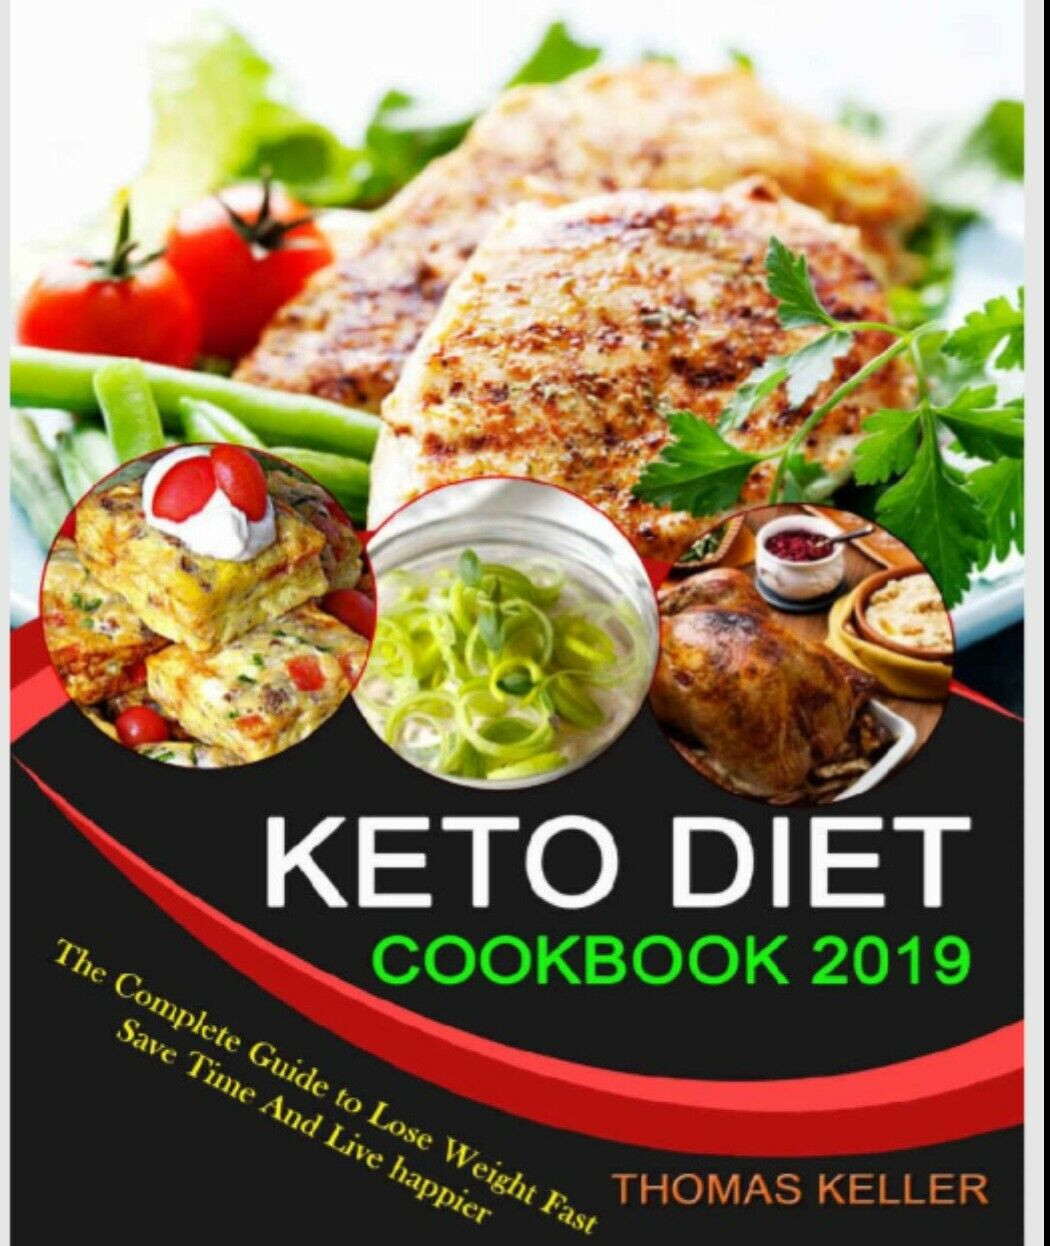 The Complete Cooking For Two Cookbook Pdf
 Keto Diet Cook Book 2019 The plete Guide to Lose Weight